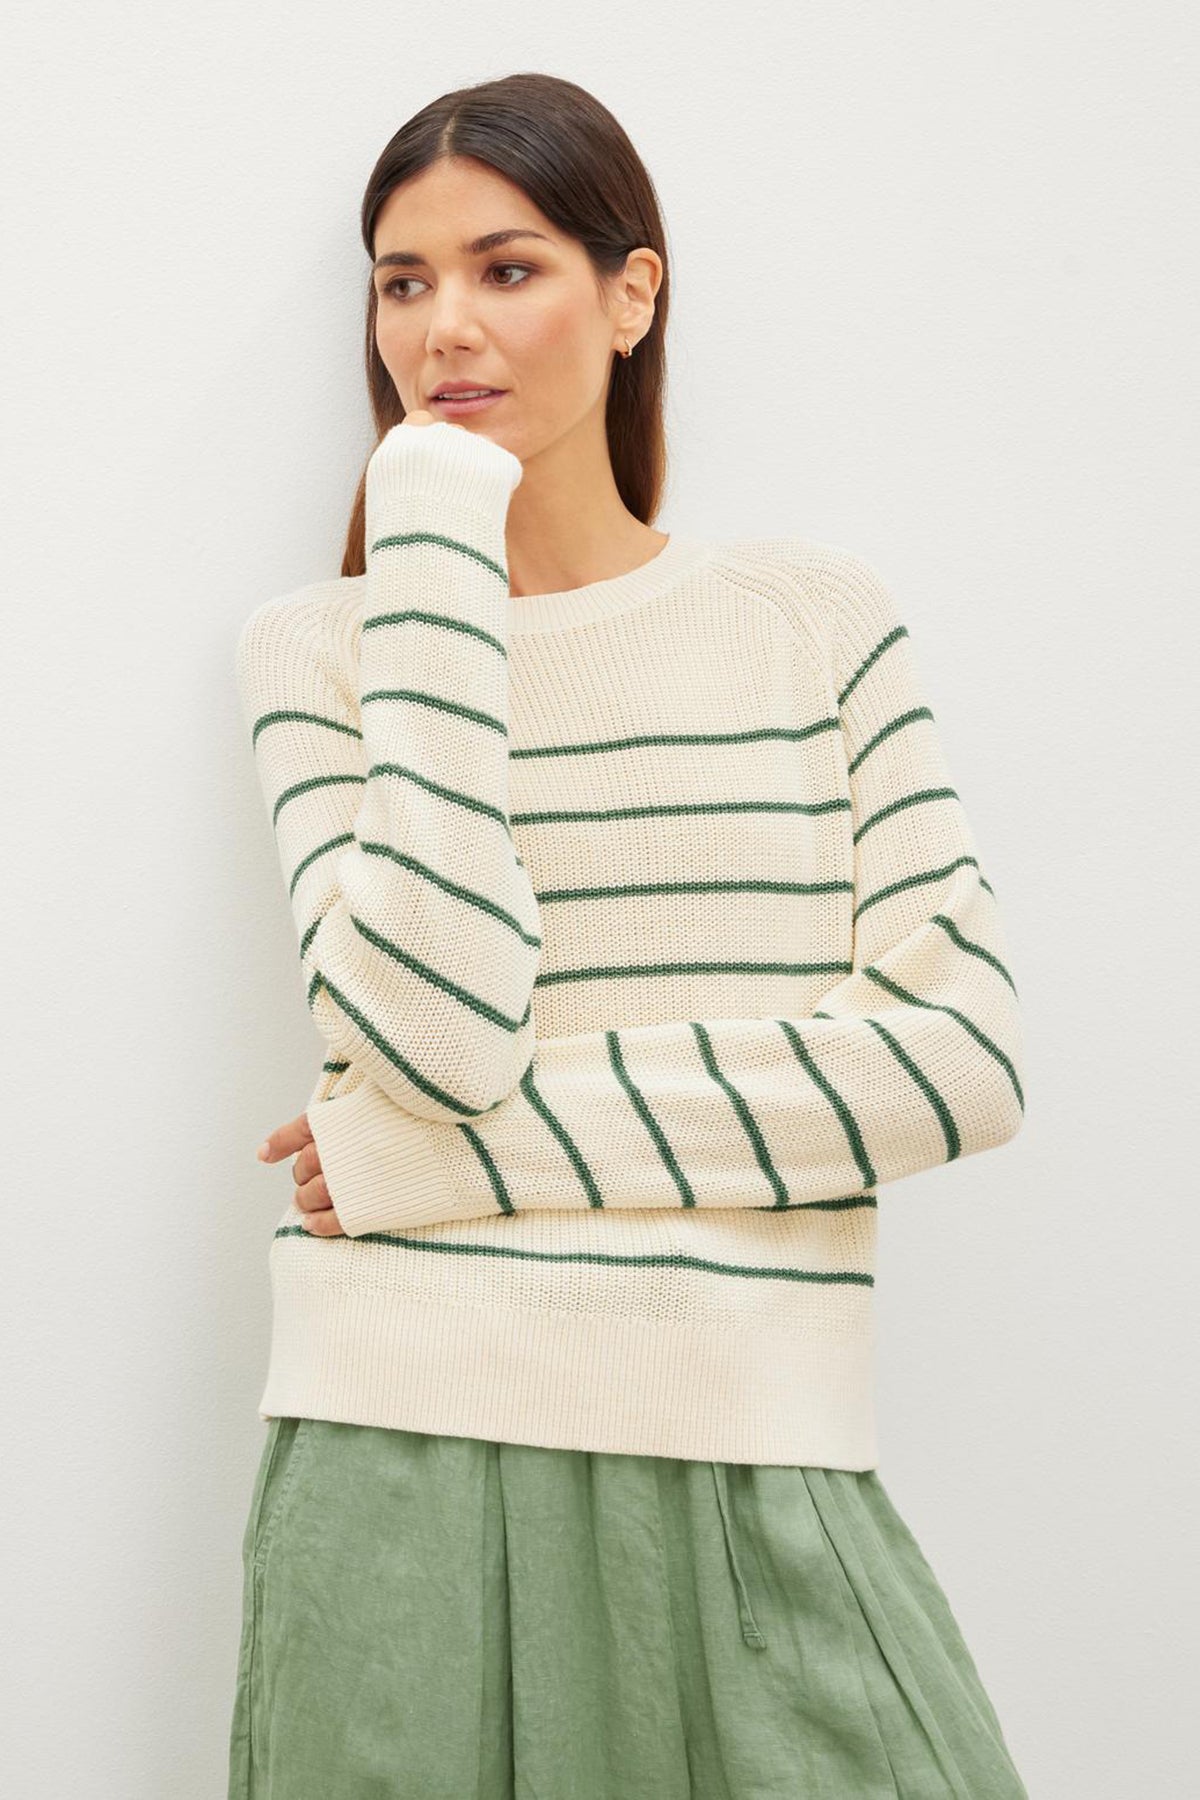   The model is wearing a Velvet by Graham & Spencer CHAYSE STRIPED CREW NECK SWEATER as part of her casual wear ensemble. 